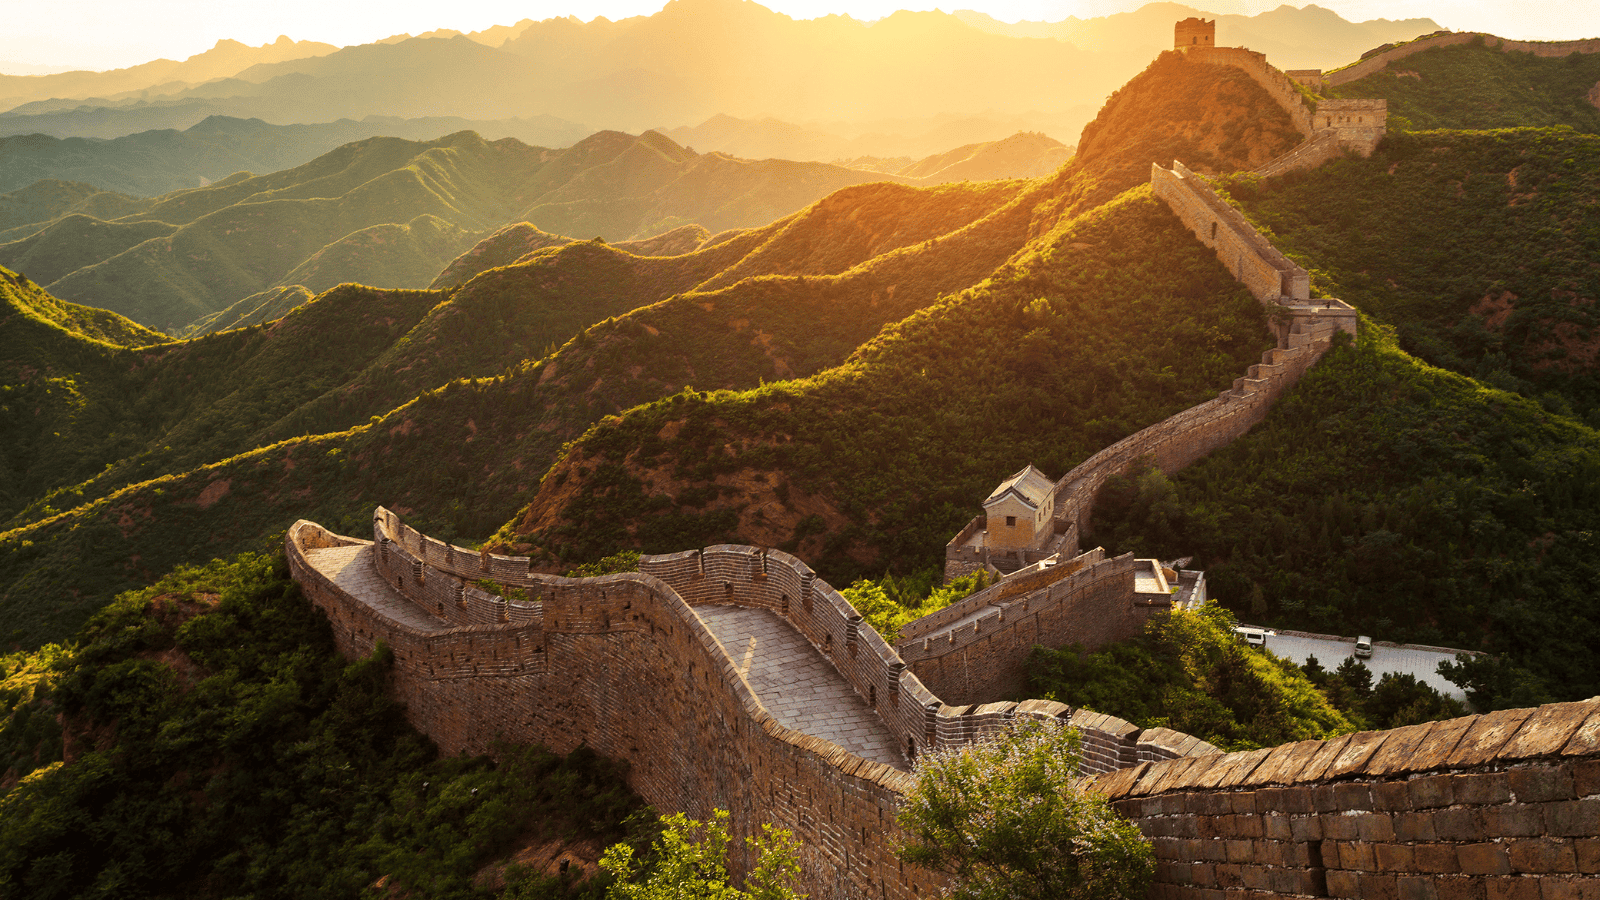 <p><span>The construction of the Great Wall of China began over 2000 years ago and spanned centuries, as it was constantly expanded and upgraded. </span><a href="https://www.history.com/topics/ancient-china/great-wall-of-china"><span>History.com</span></a><span> tells us it was the emperor Qin Shi Huang who first came up with the idea, although it never quite managed to keep invaders out!</span></p>